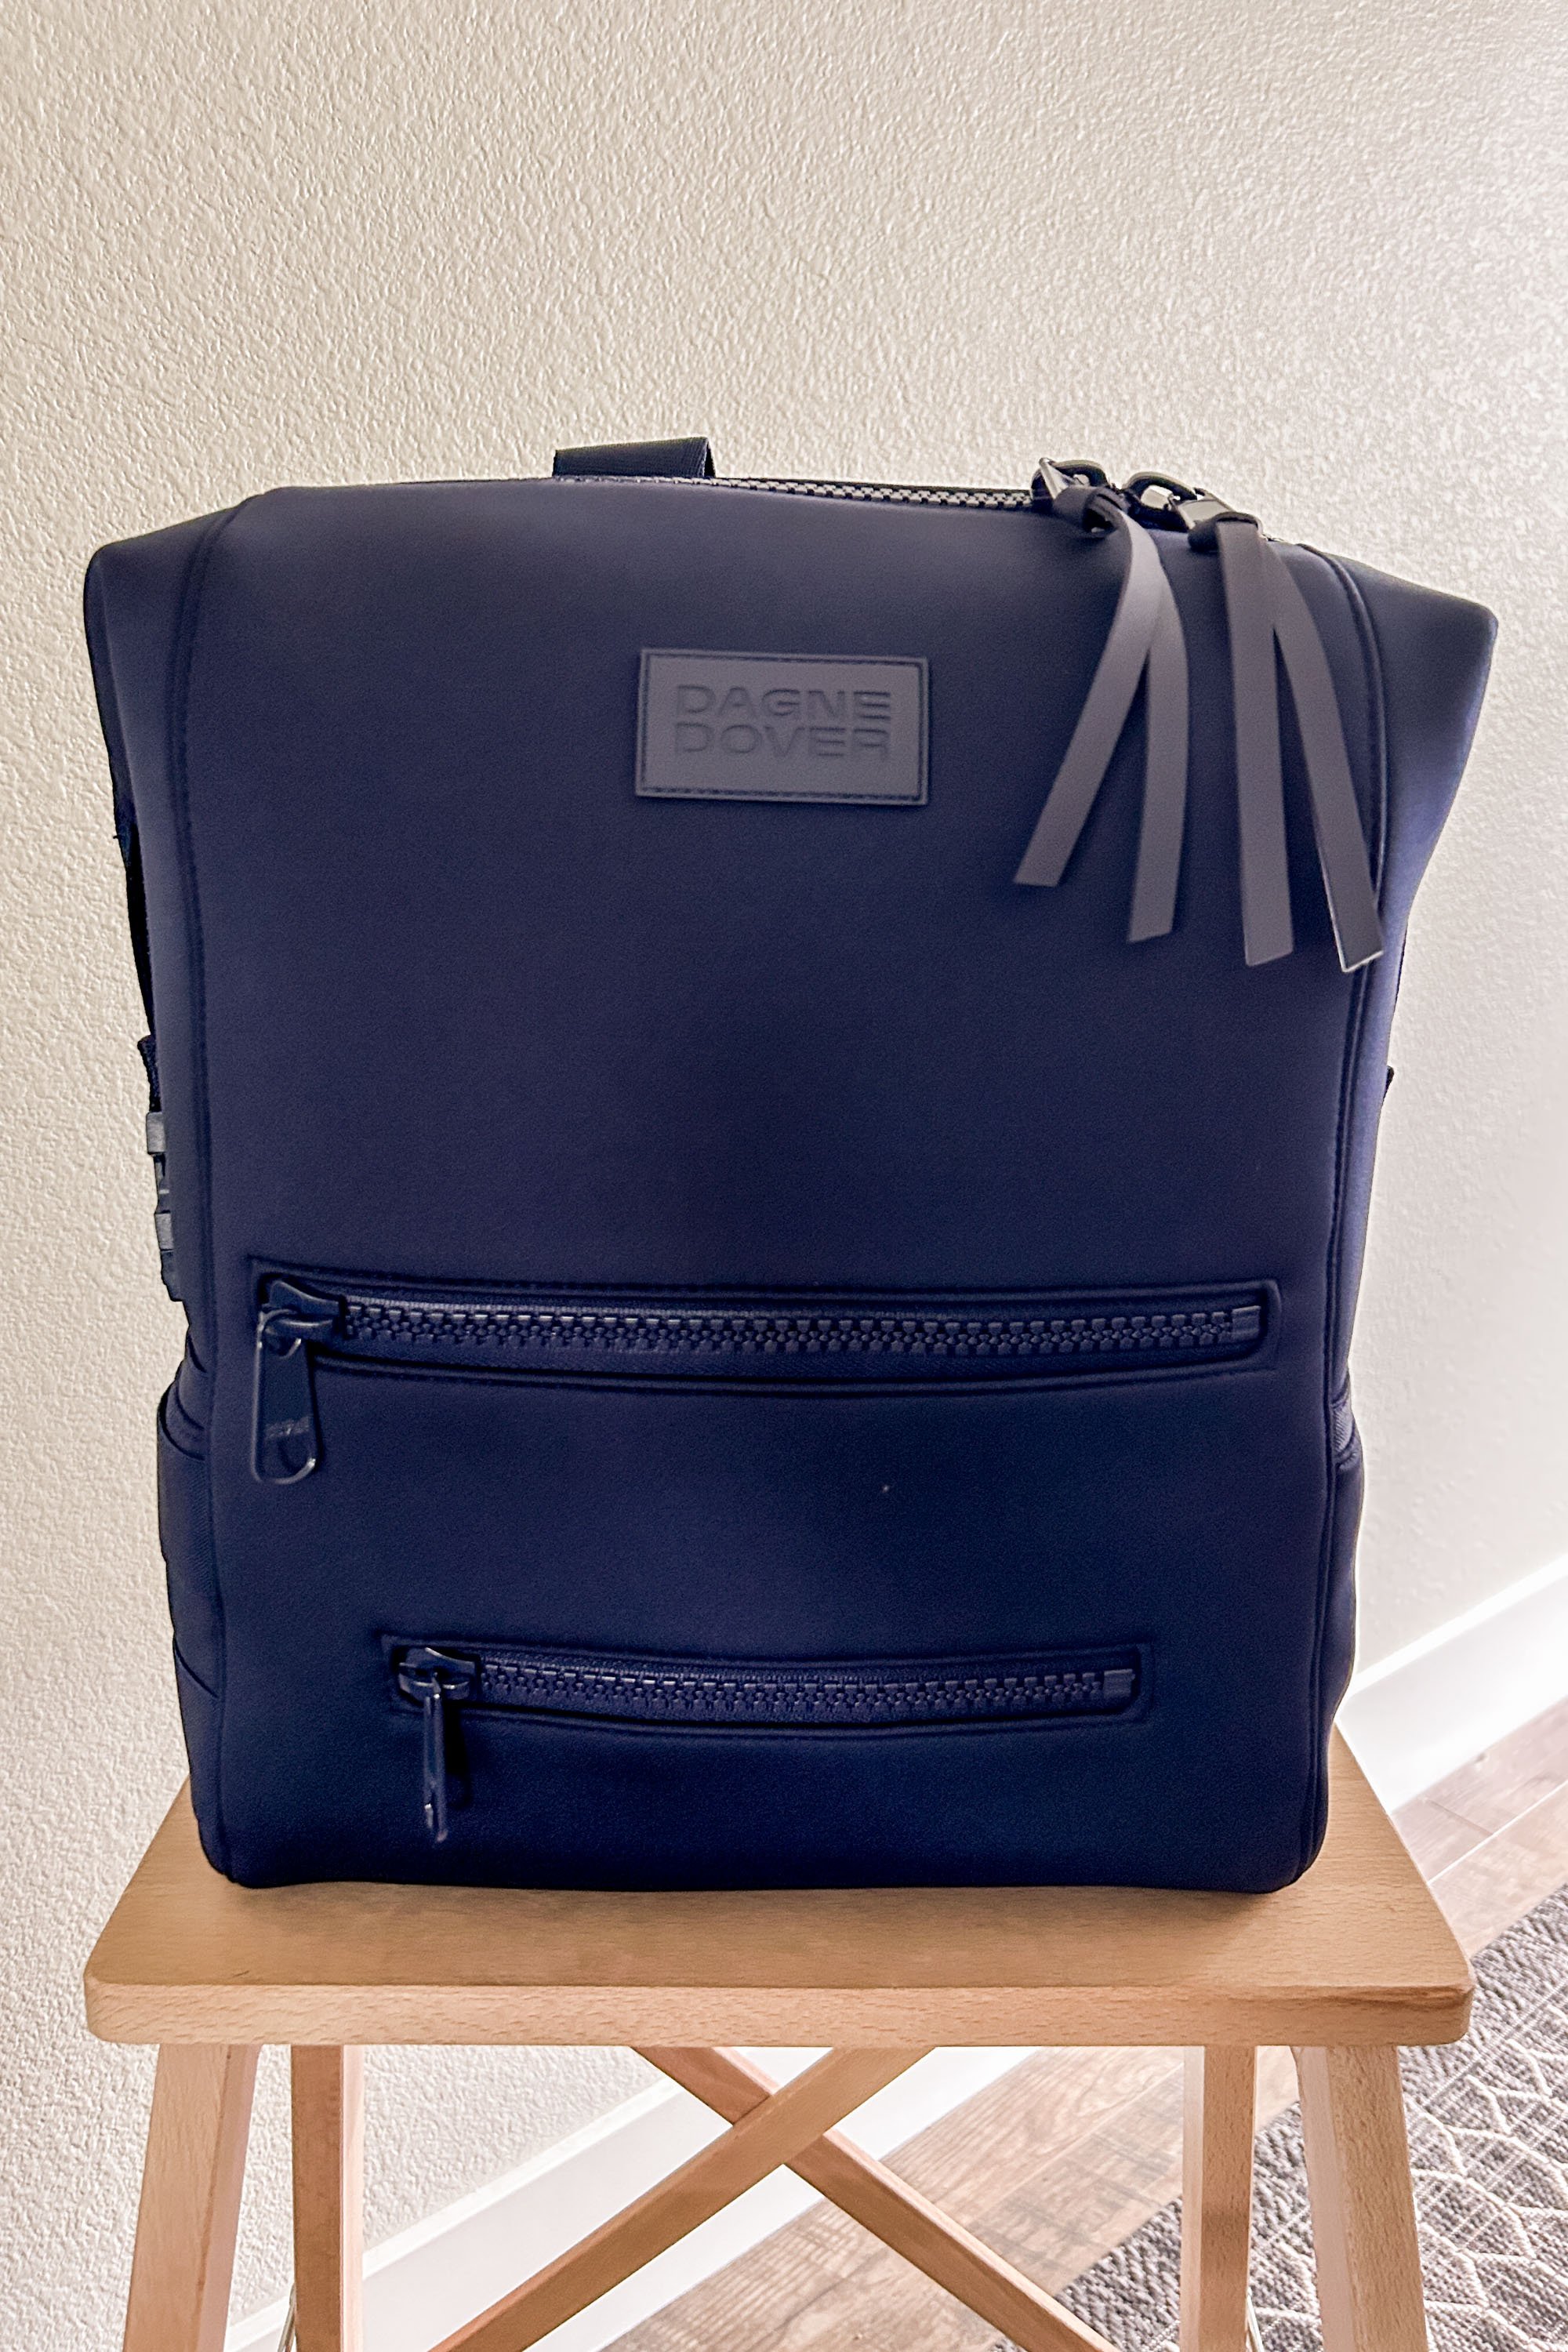 Dagne Dover Landon Carryall Bag Review 2023: Versatile And Spacious -  Forbes Vetted